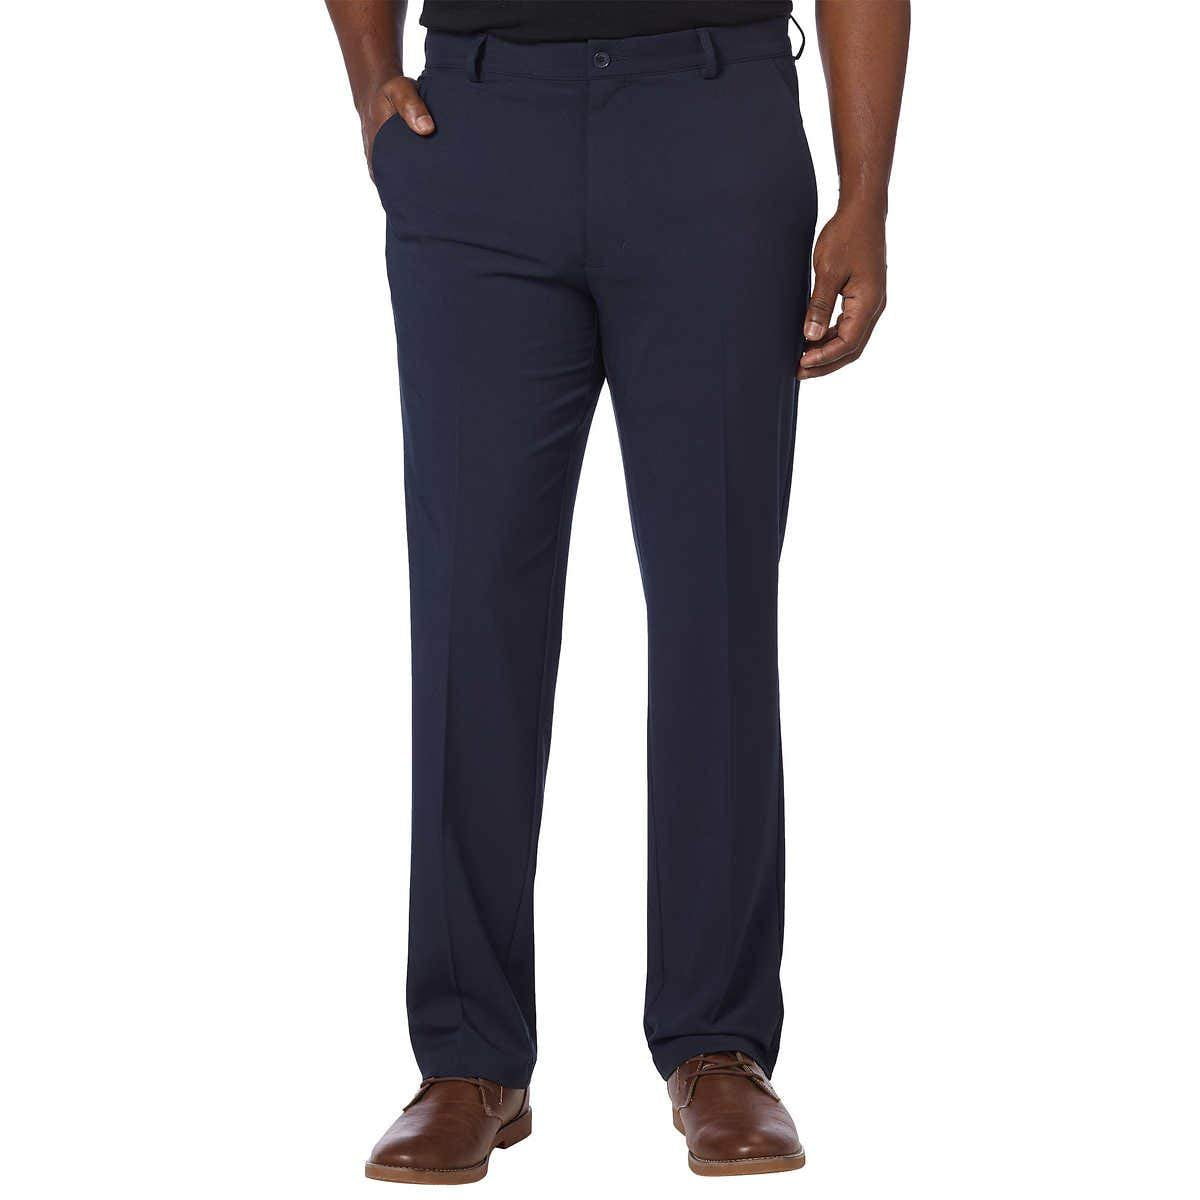 Greg Norman ML75 Ultimate Travel Pant NEW 36x30 Navy Blue NEW Moisture Wicking 